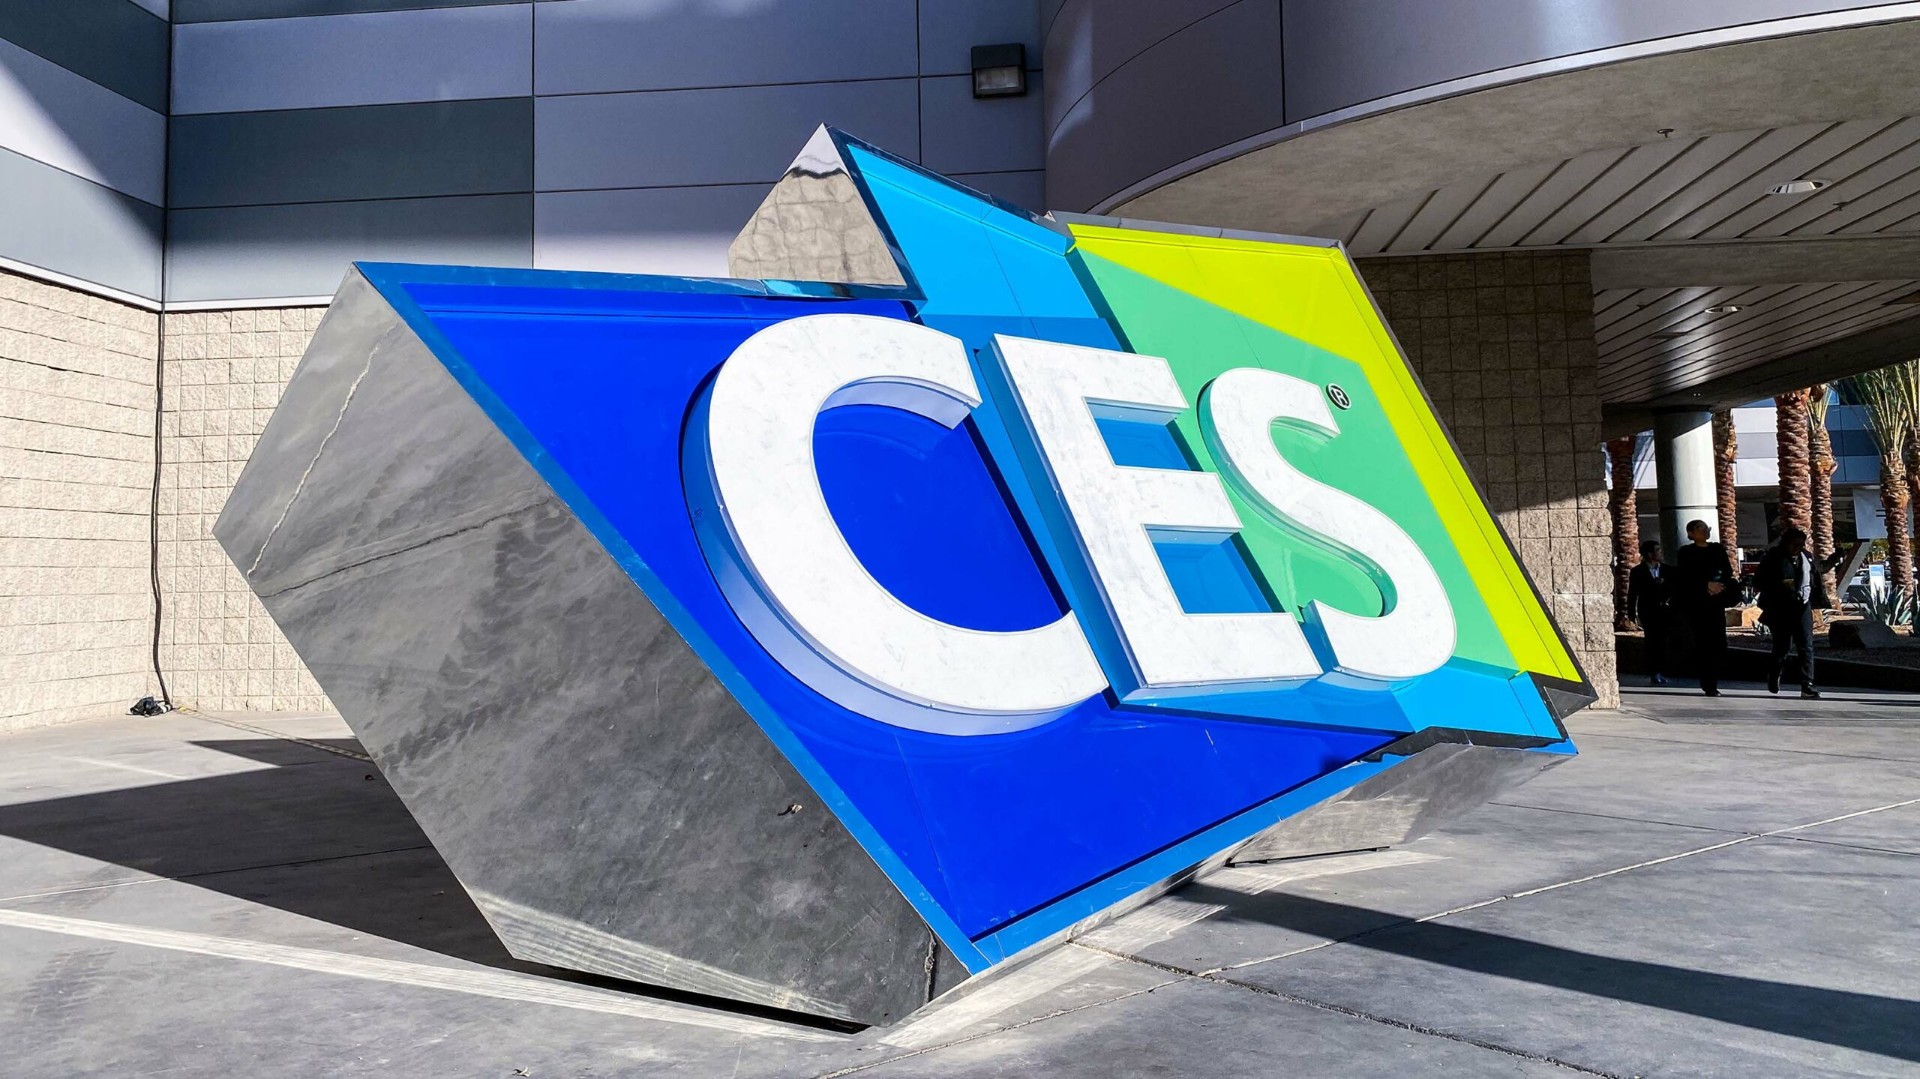 CES Update on Technology solutions for the home Image